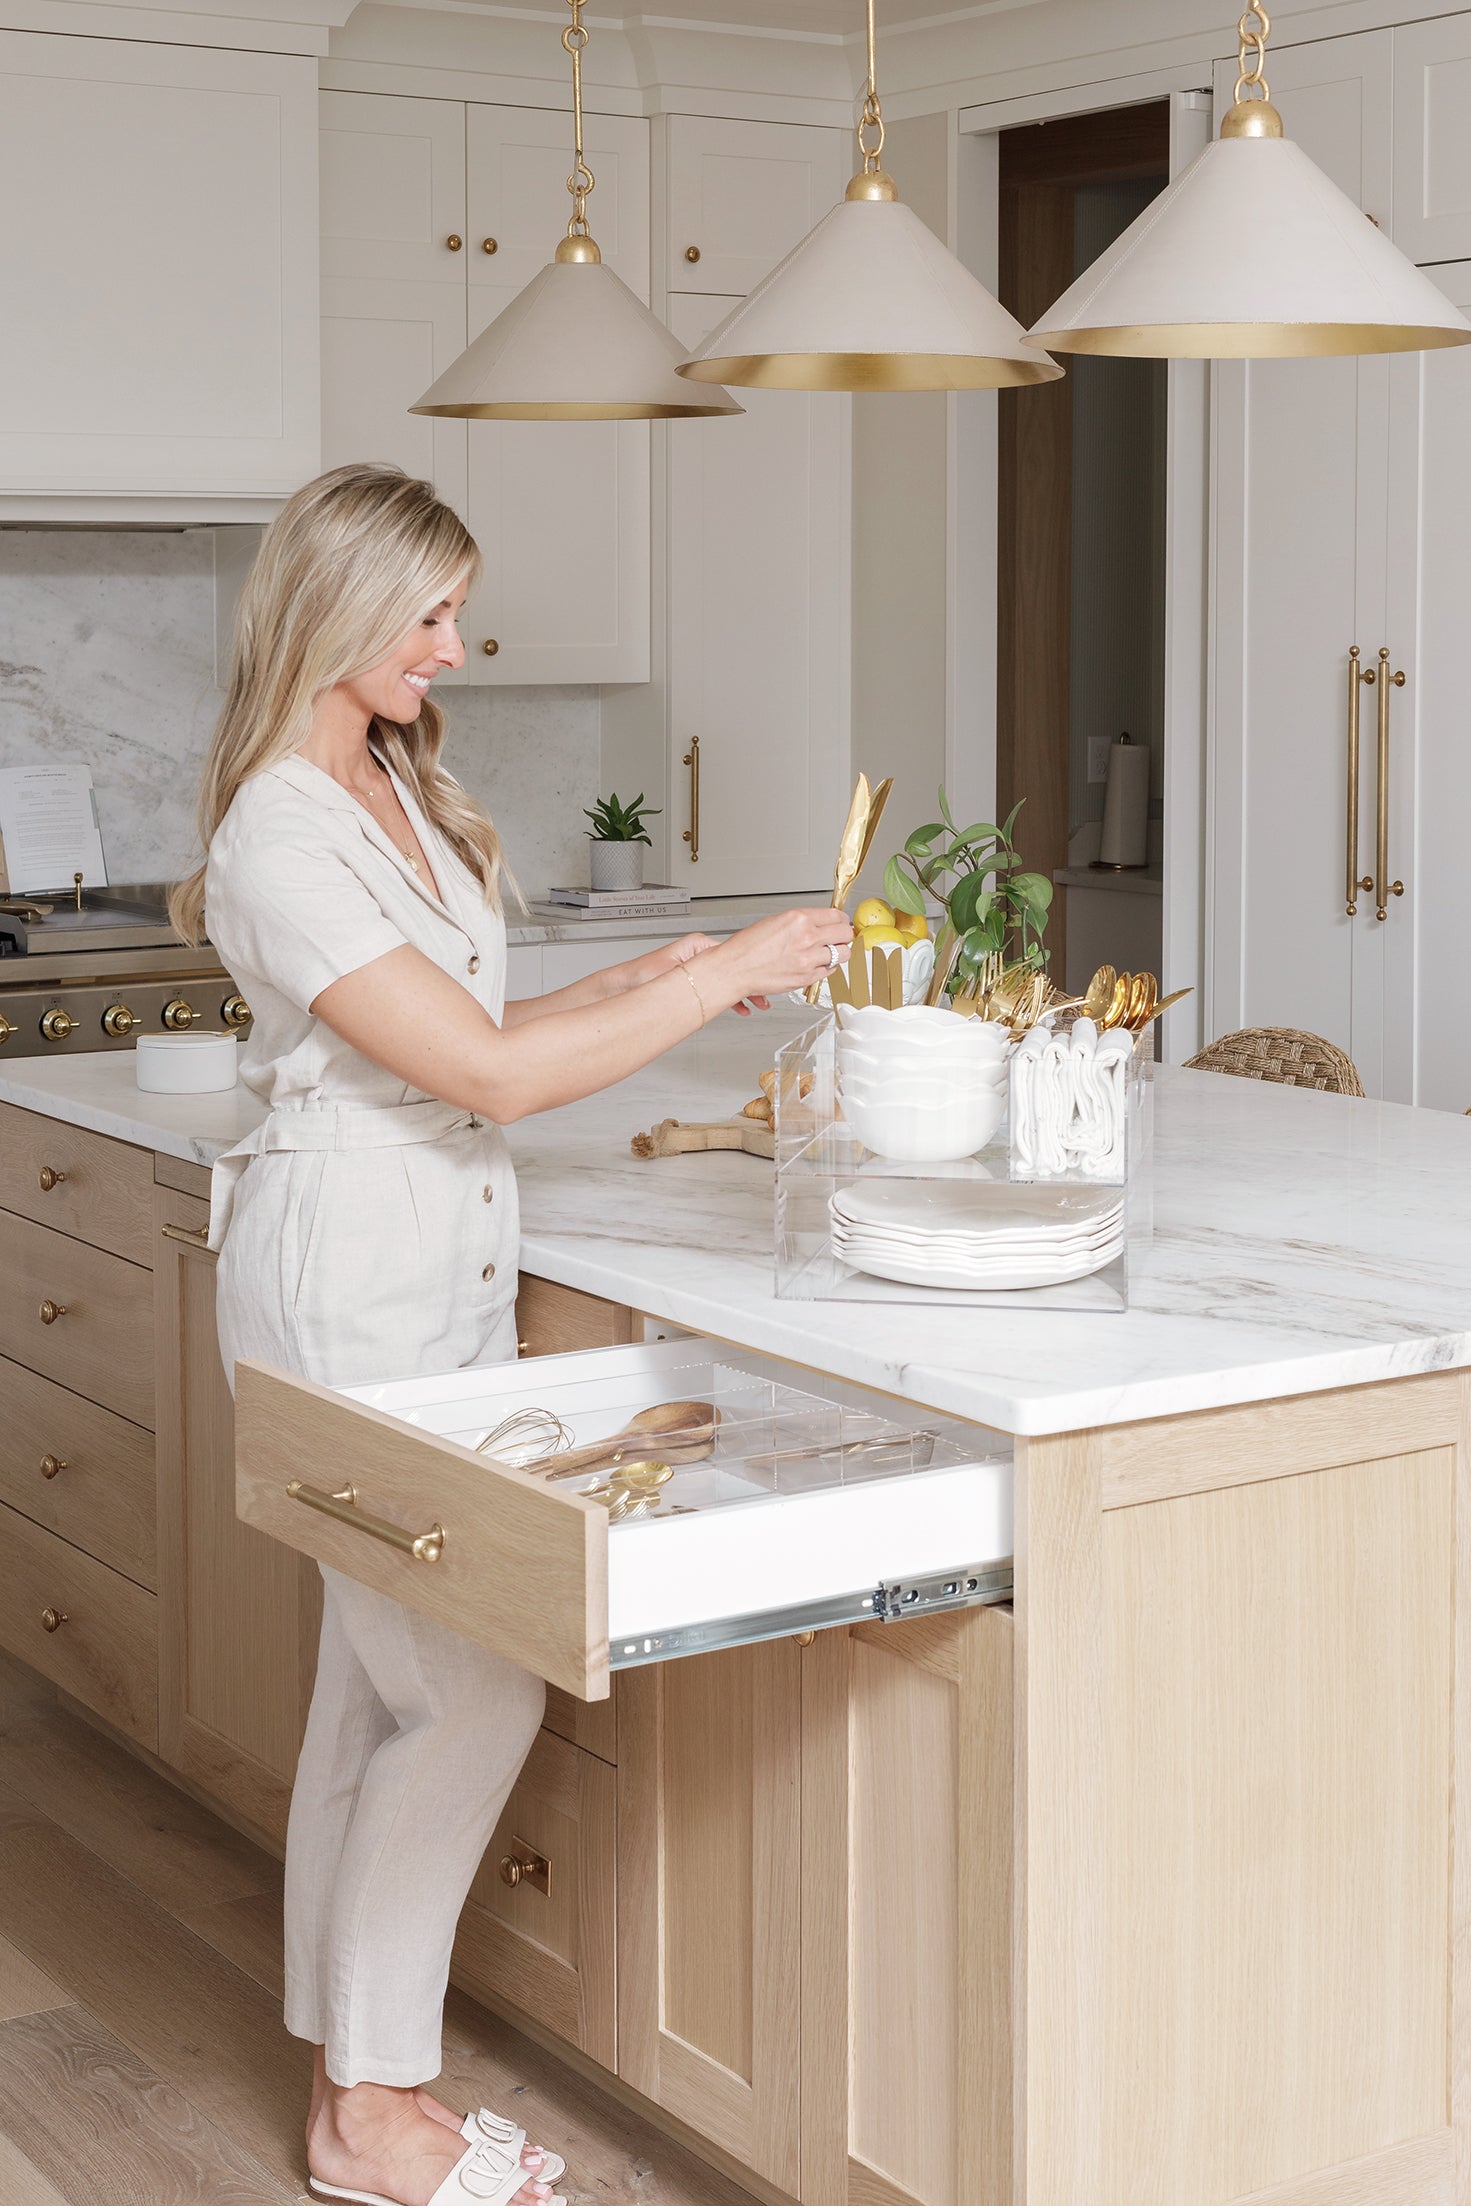 A woman stocks the Acrylic Utensil Caddy with gold cutlery from her kitchen utensil drawer.